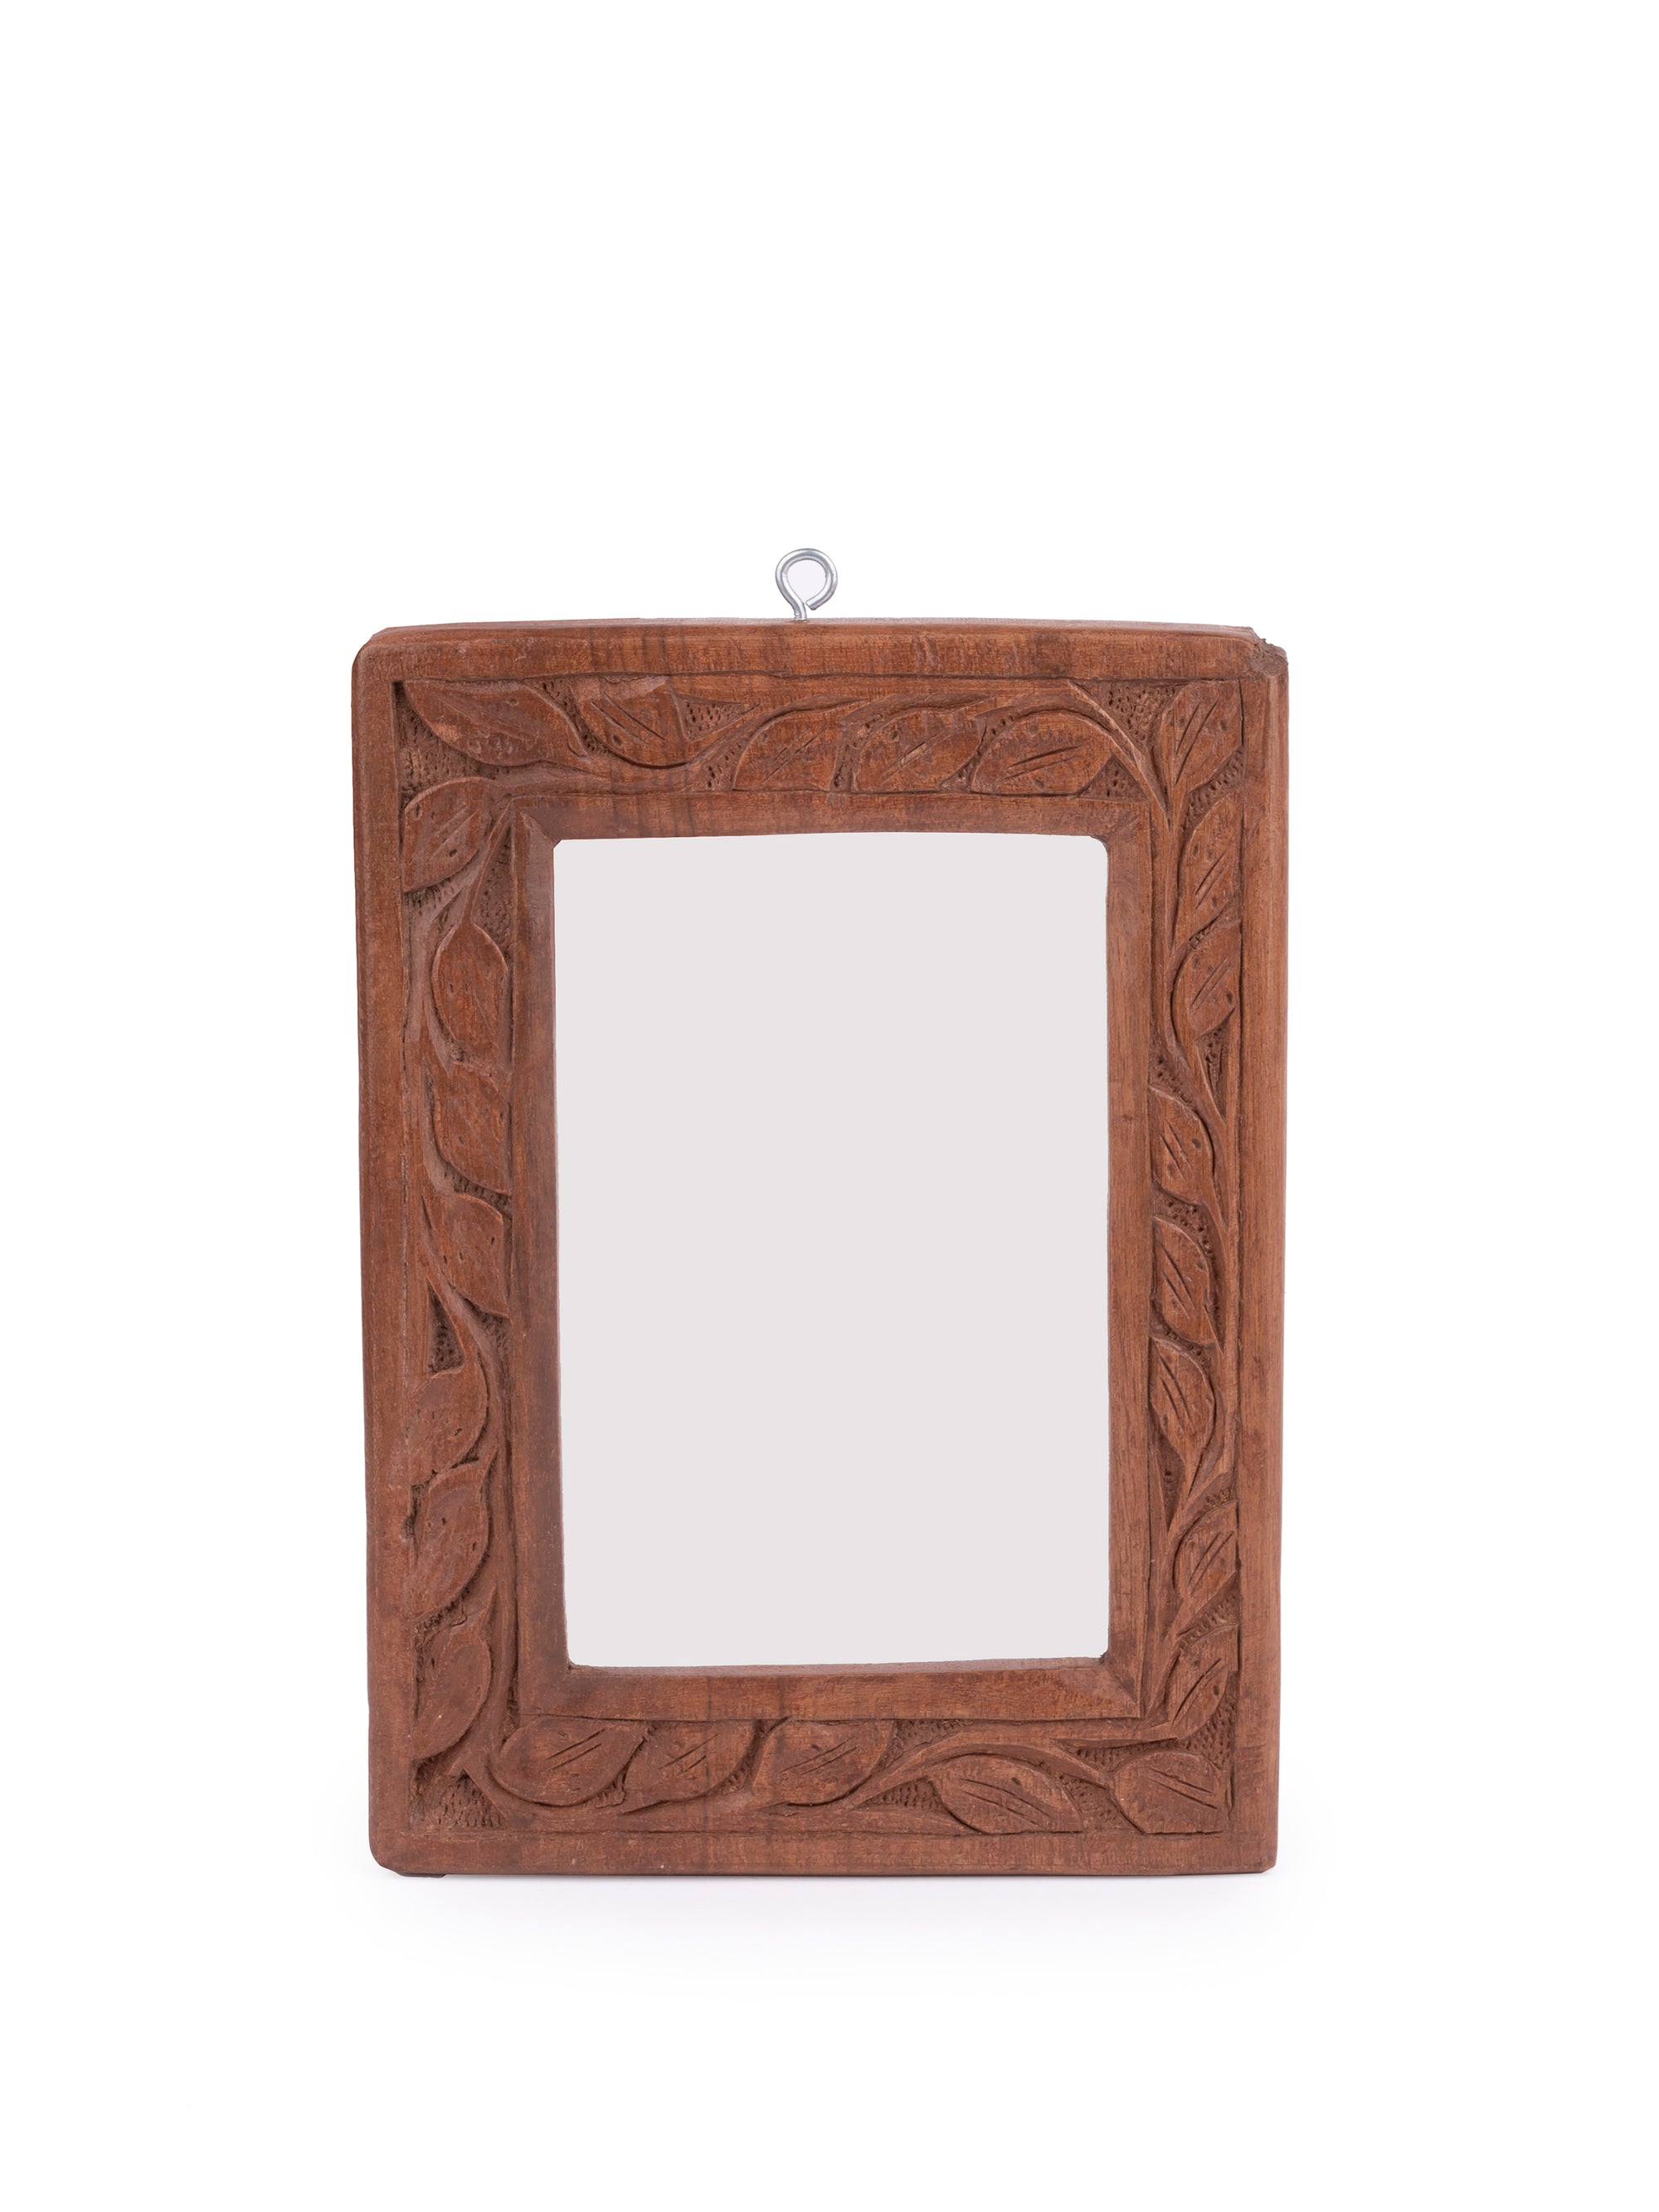 Wall hanging Photo Frame carved out of Walnut wood - 6x8 inches - The Heritage Artifacts